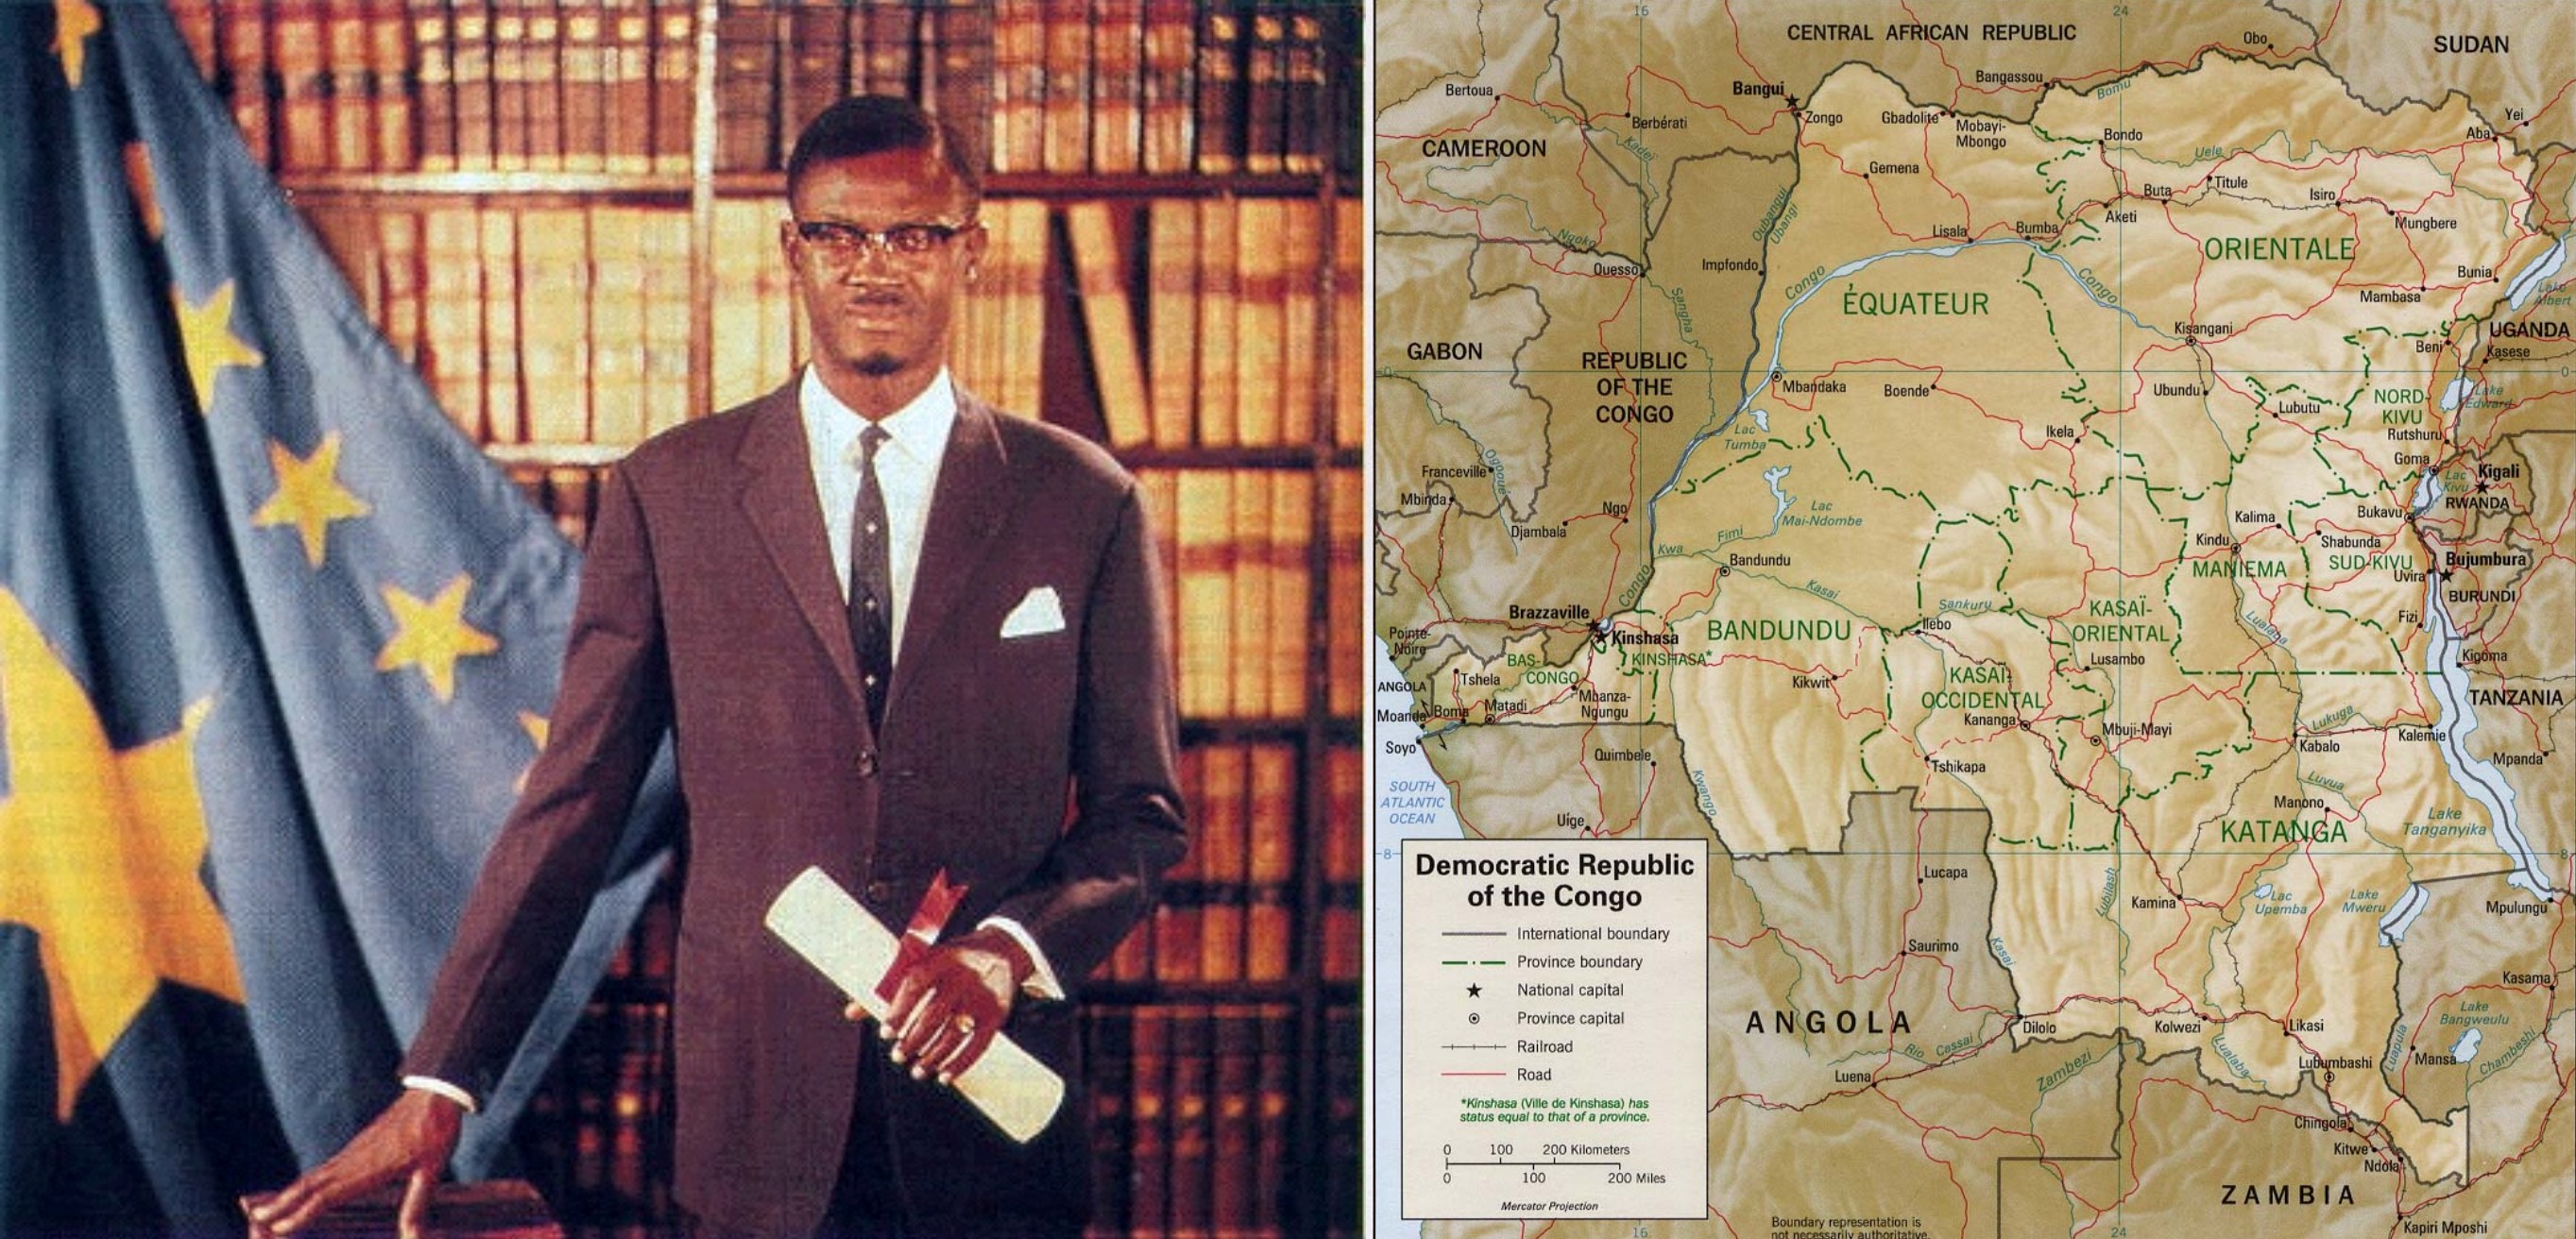 On the left, official portrait of Patrice Lumumba. On the right, a map of the Democratic Republic of the Congo.